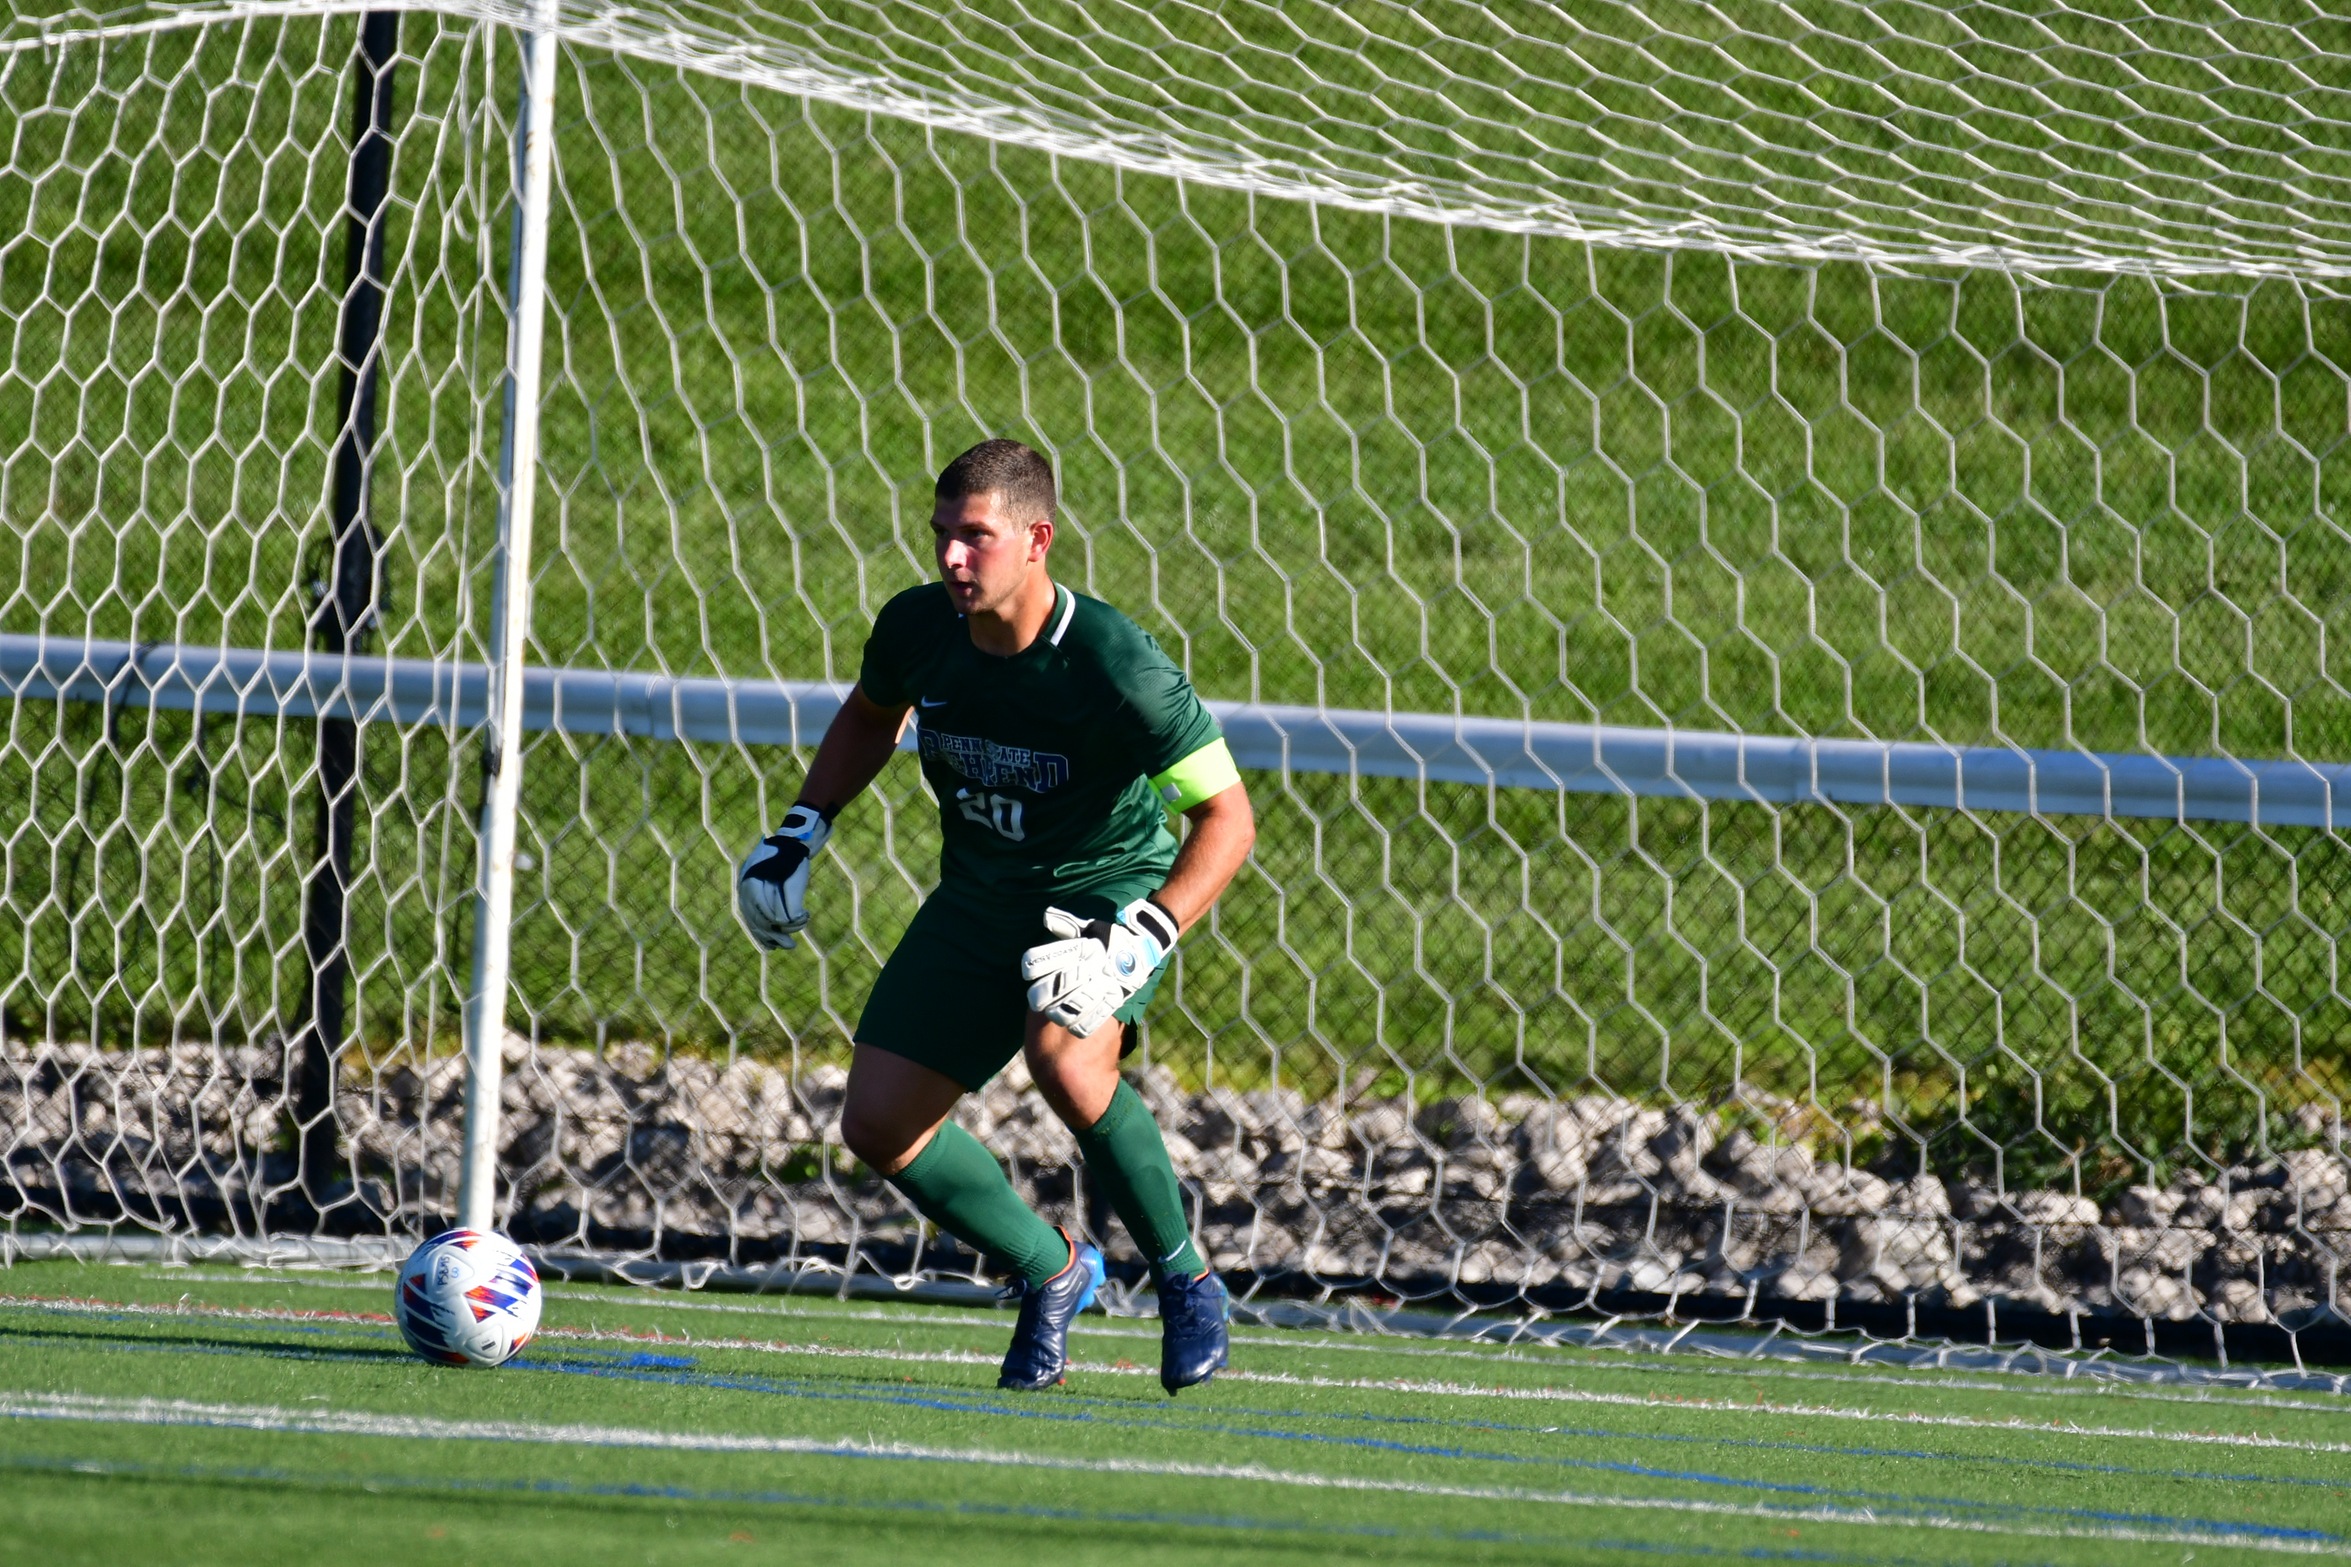 Behrend And Grove City Play To Scoreless Draw